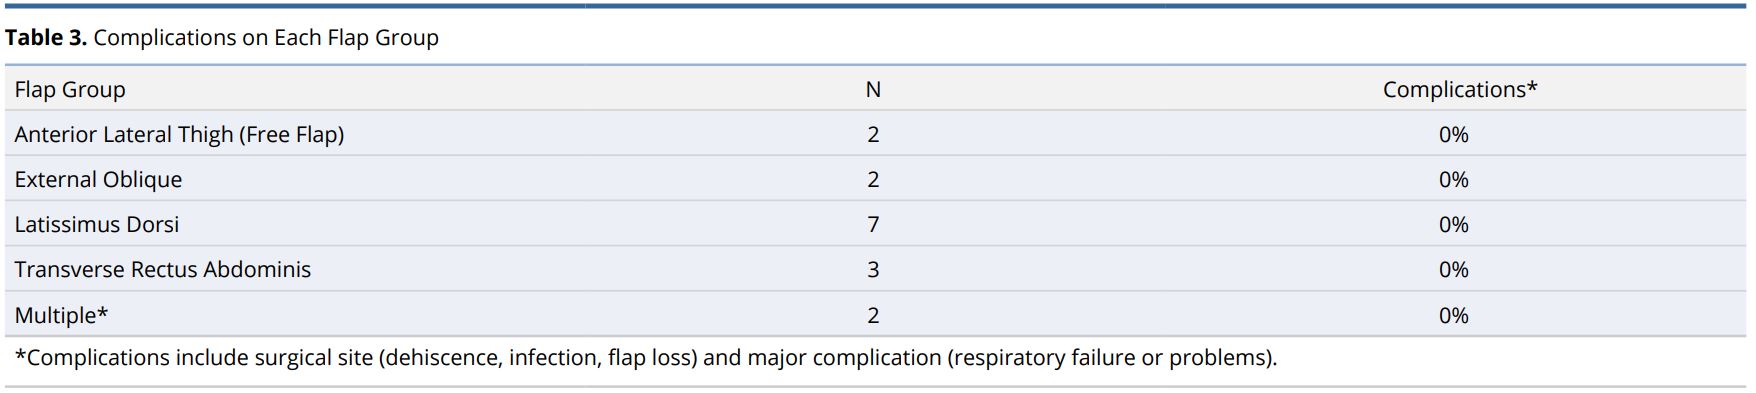 Table 3.JPGComplications on each flap group.